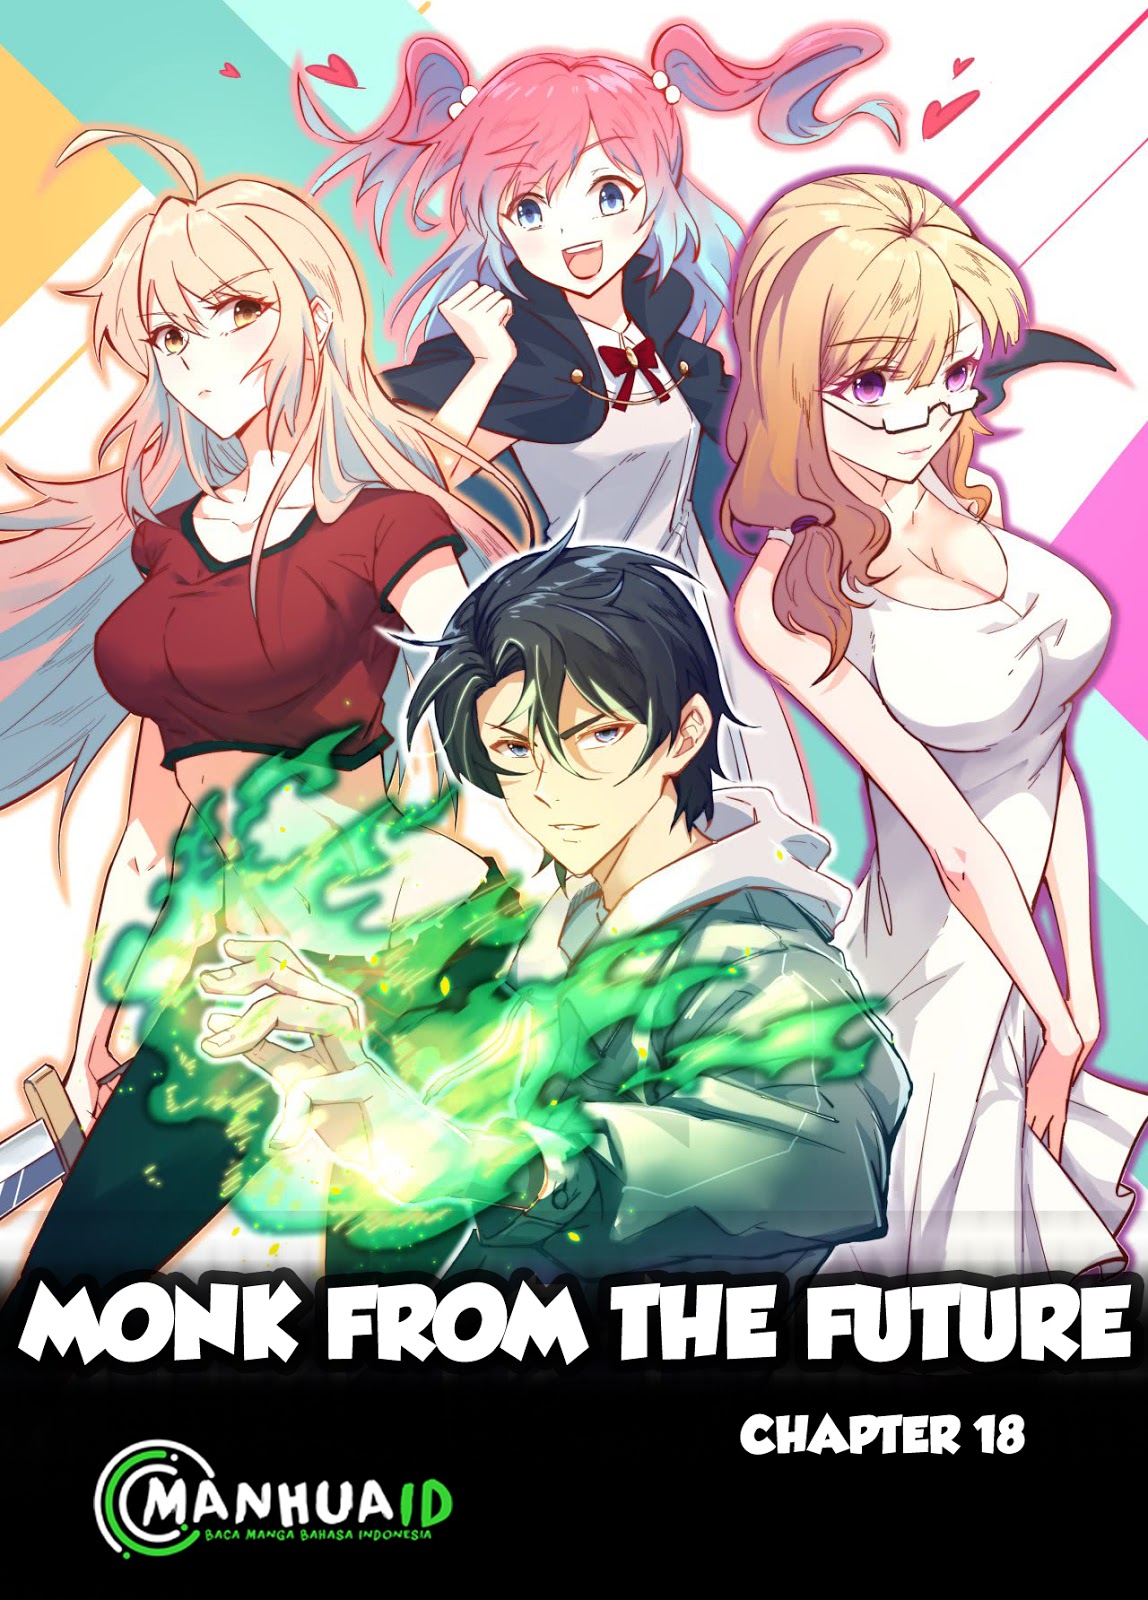 Monk From the Future Chapter 18